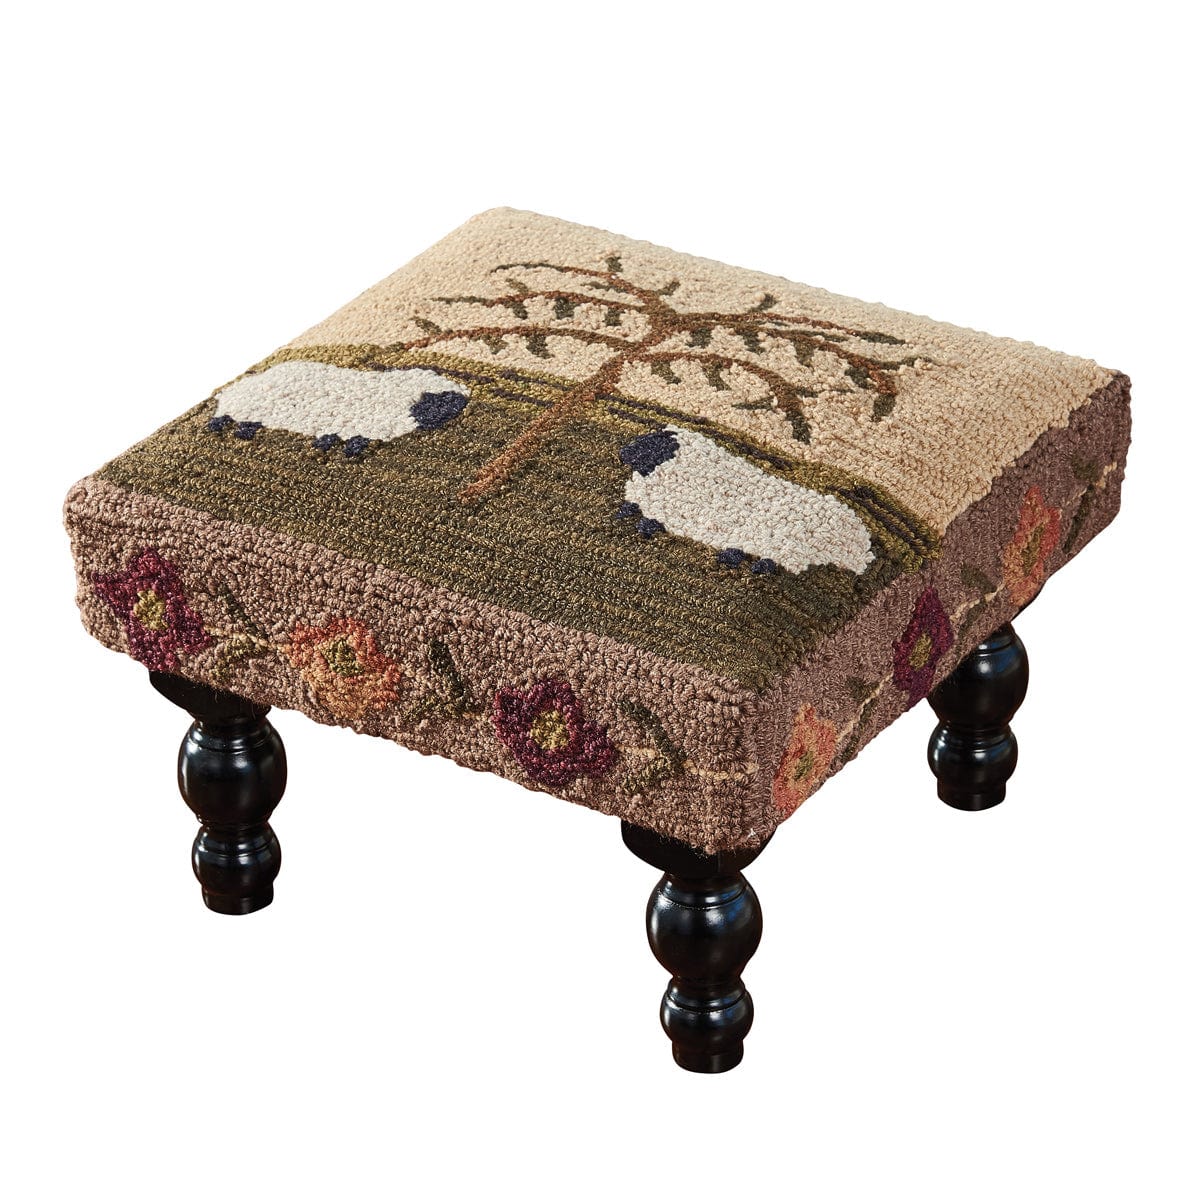 Willow & Sheep Hooked Stool 16" x 16" Square-Park Designs-The Village Merchant